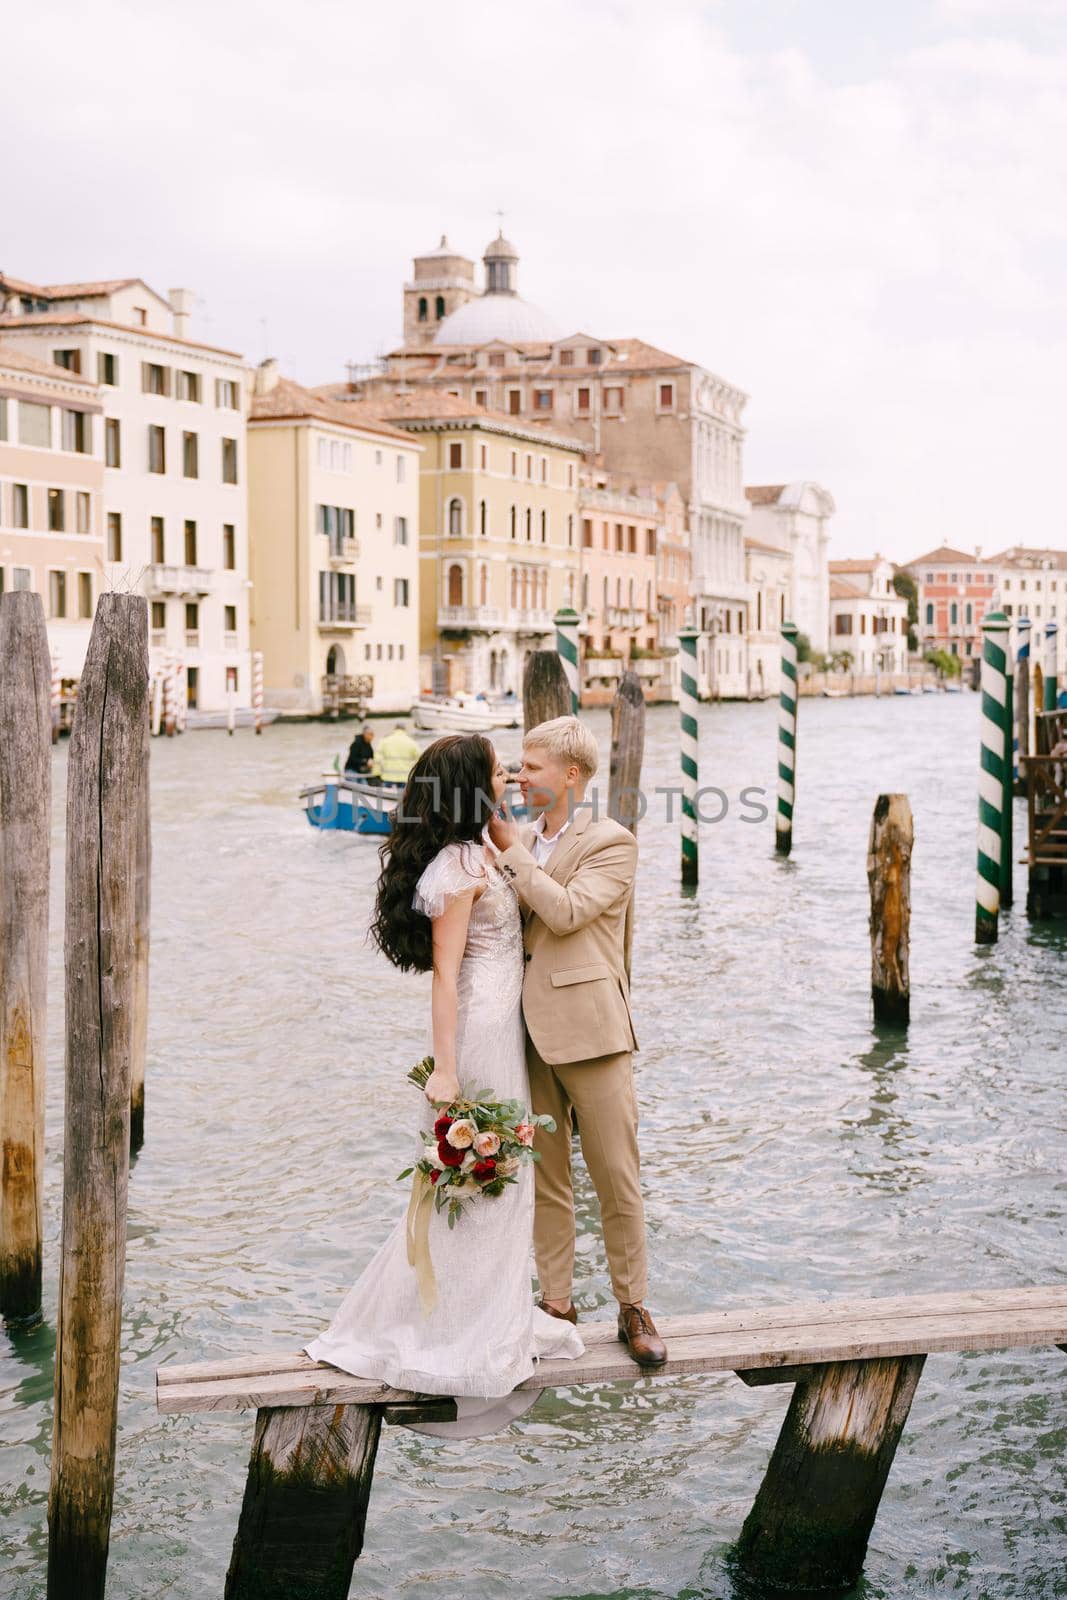 Italy wedding in Venice. The bride and groom are standing on a wooden pier for boats and gondolas, near the Striped green and white mooring poles, against backdrop of facades of Grand Canal buildings. by Nadtochiy